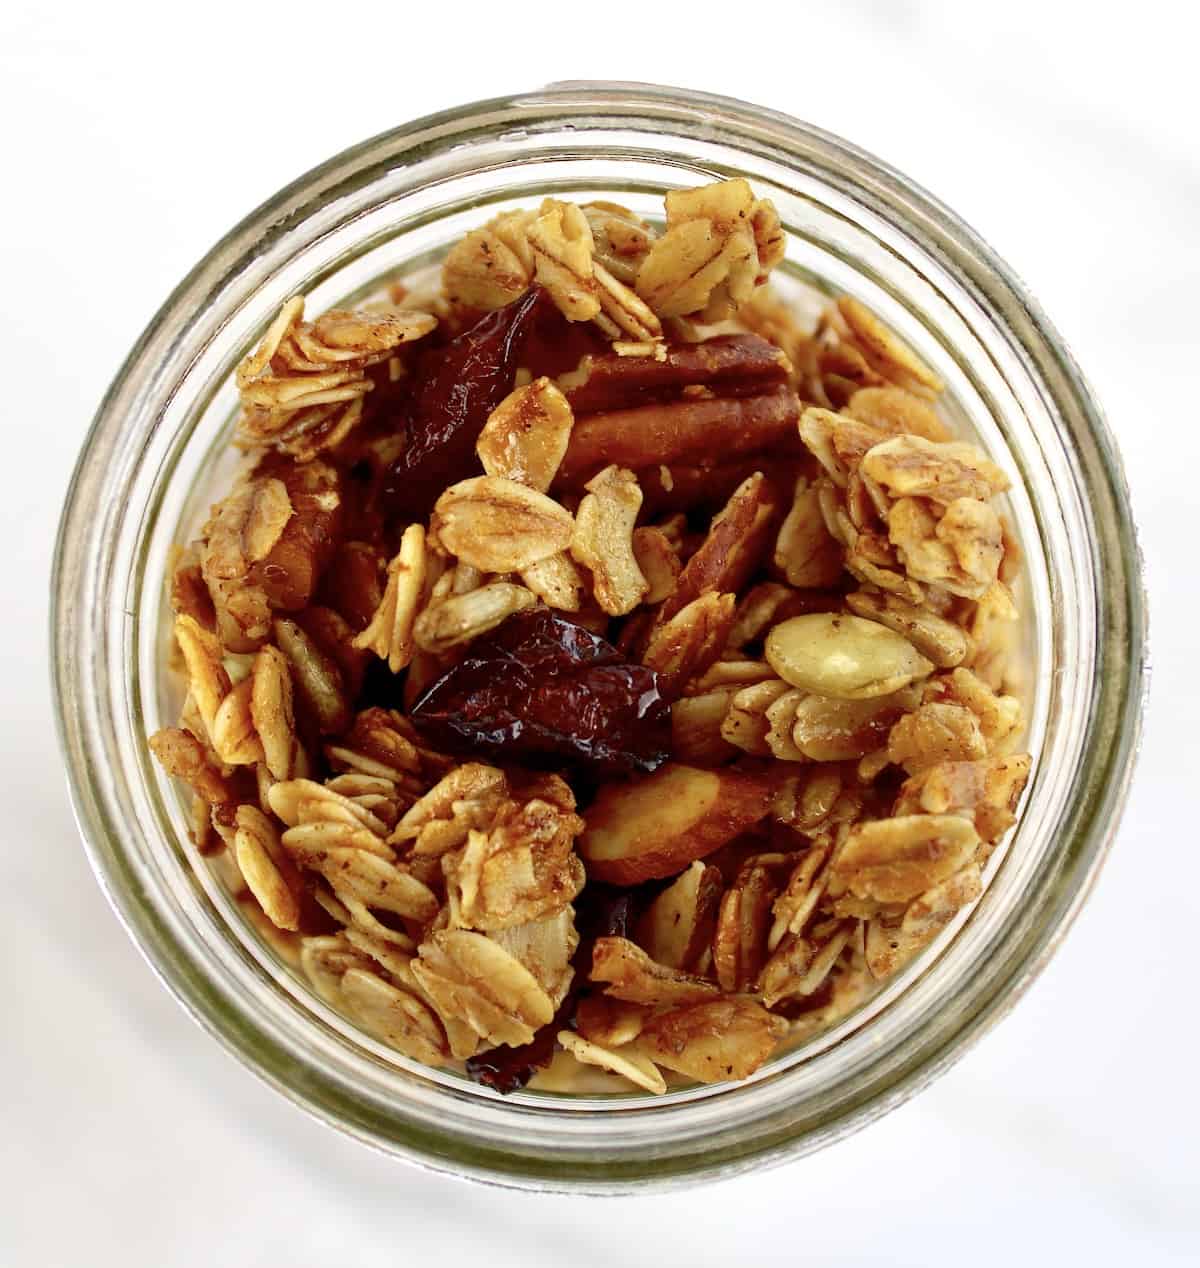 overhead view of Homemade Granola in open glass jar